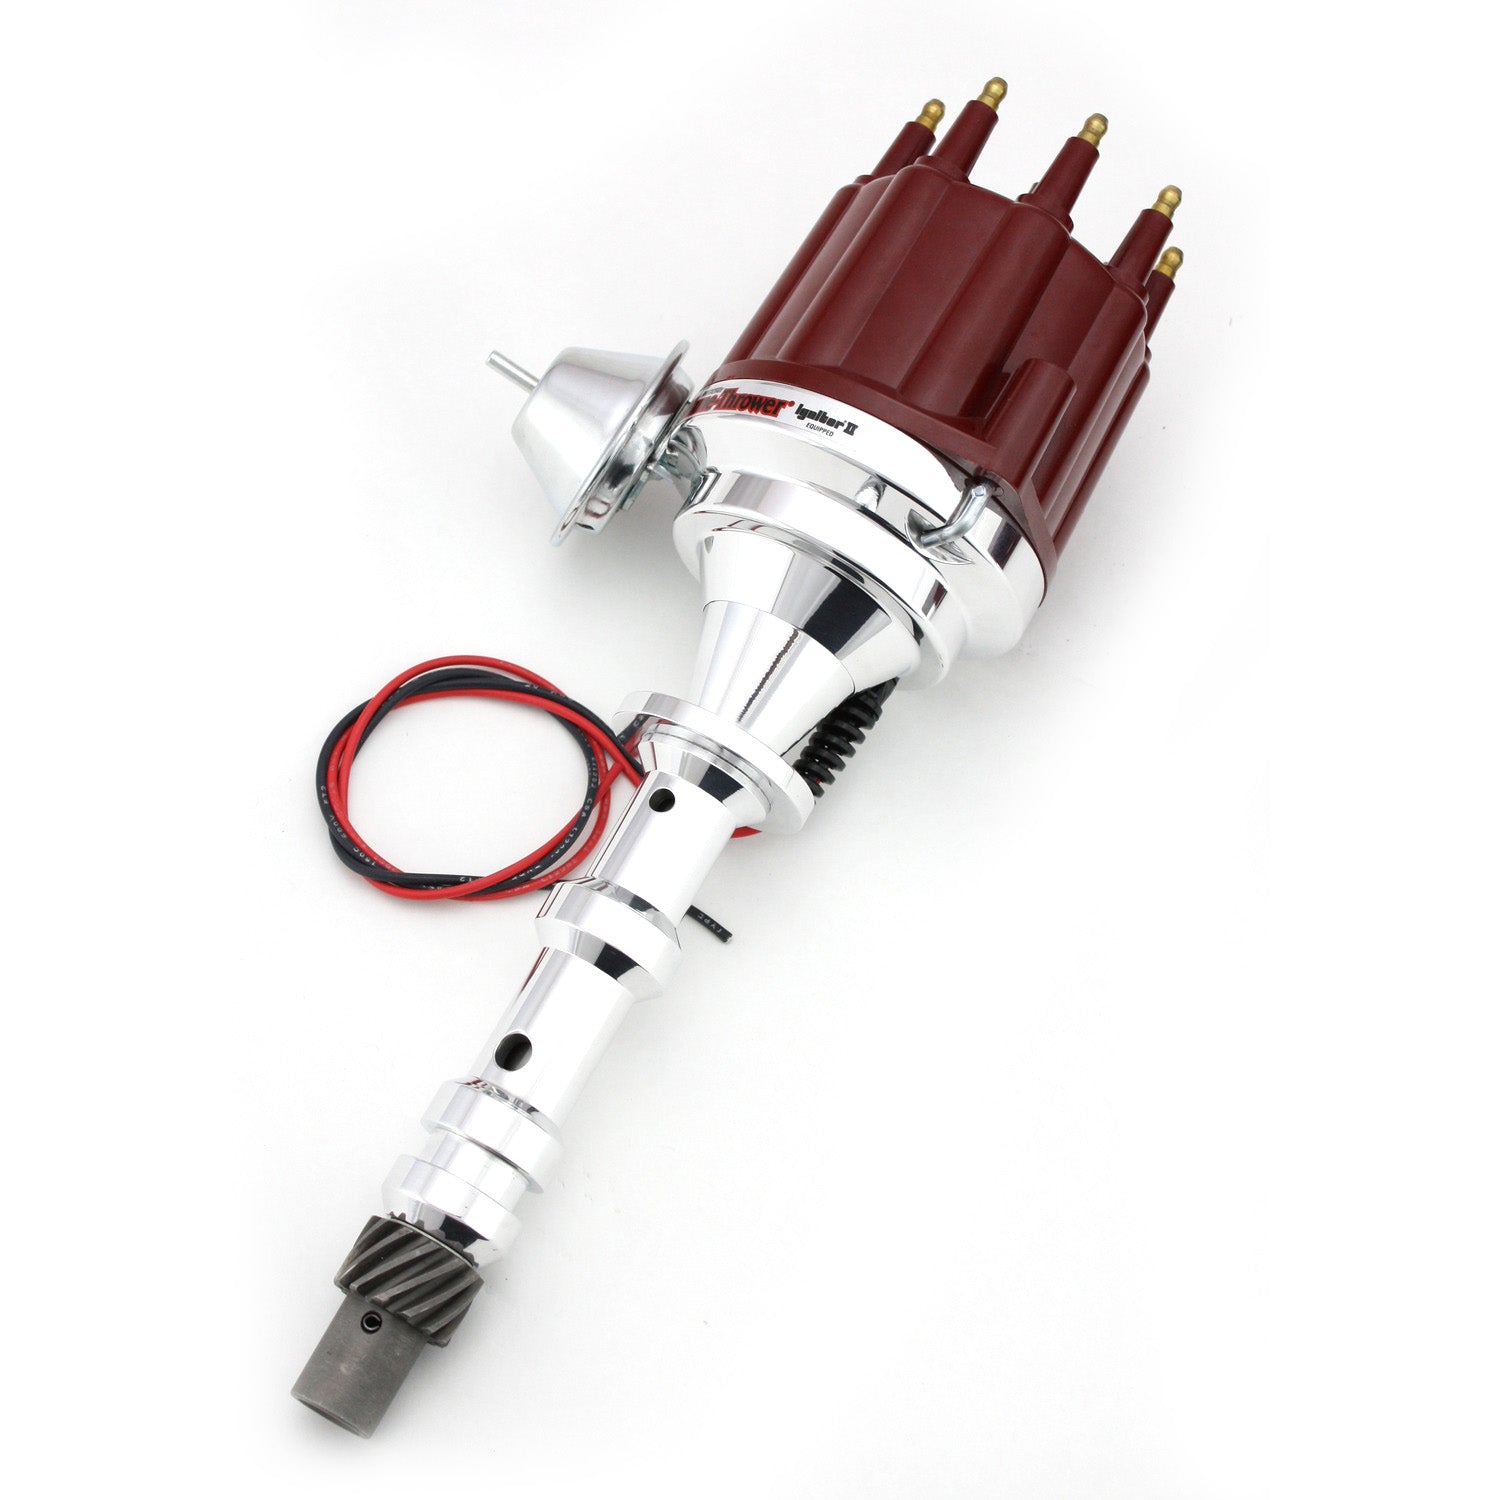 PerTronix D101711 Flame-Thrower Electronic Distributor Billet Chevrolet 409 Plug and Play with Ignitor II Technology Vacuum Advance Red Male Cap